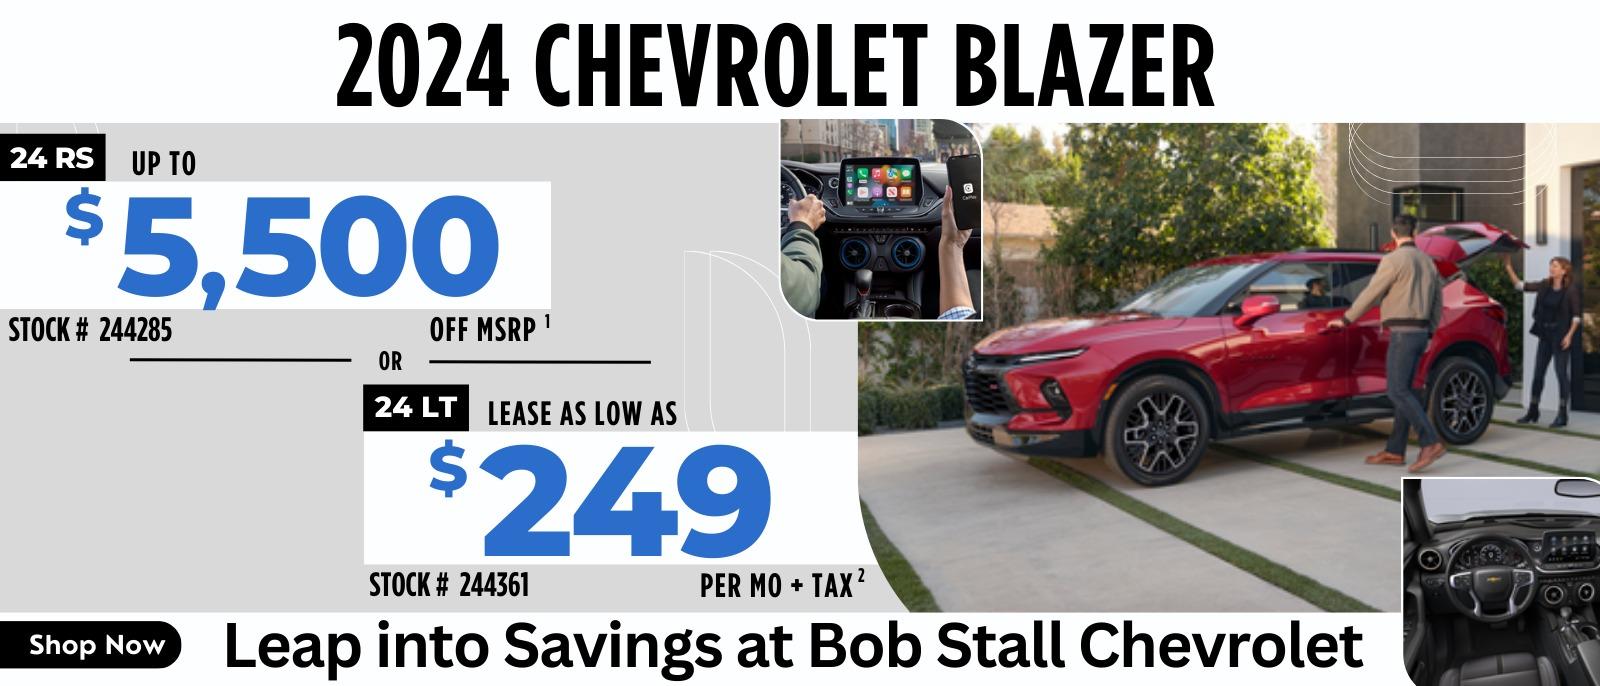 Blazer 2024  Savings - Up to $5,500 off MSRP or Lease as low as $249 per month for 36 Months